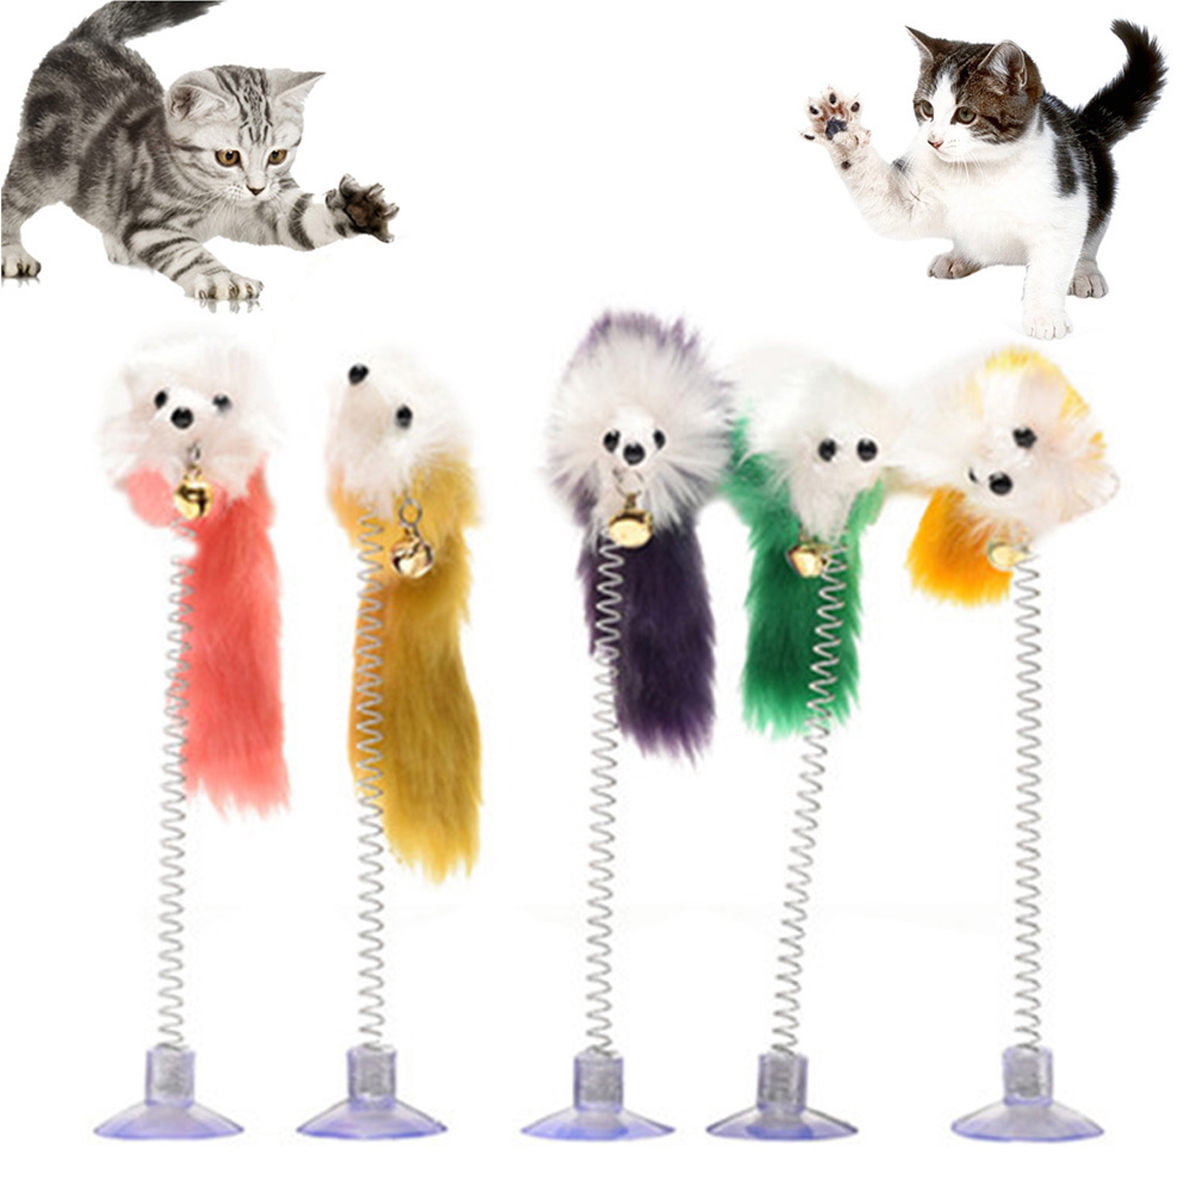 MAIYU Cat Teaser Wand 5 Packs Metal Wire Spring Cat Toy with Feather and Bell Sucker Cat Teaser Rod Interactive Cat Tease Toys